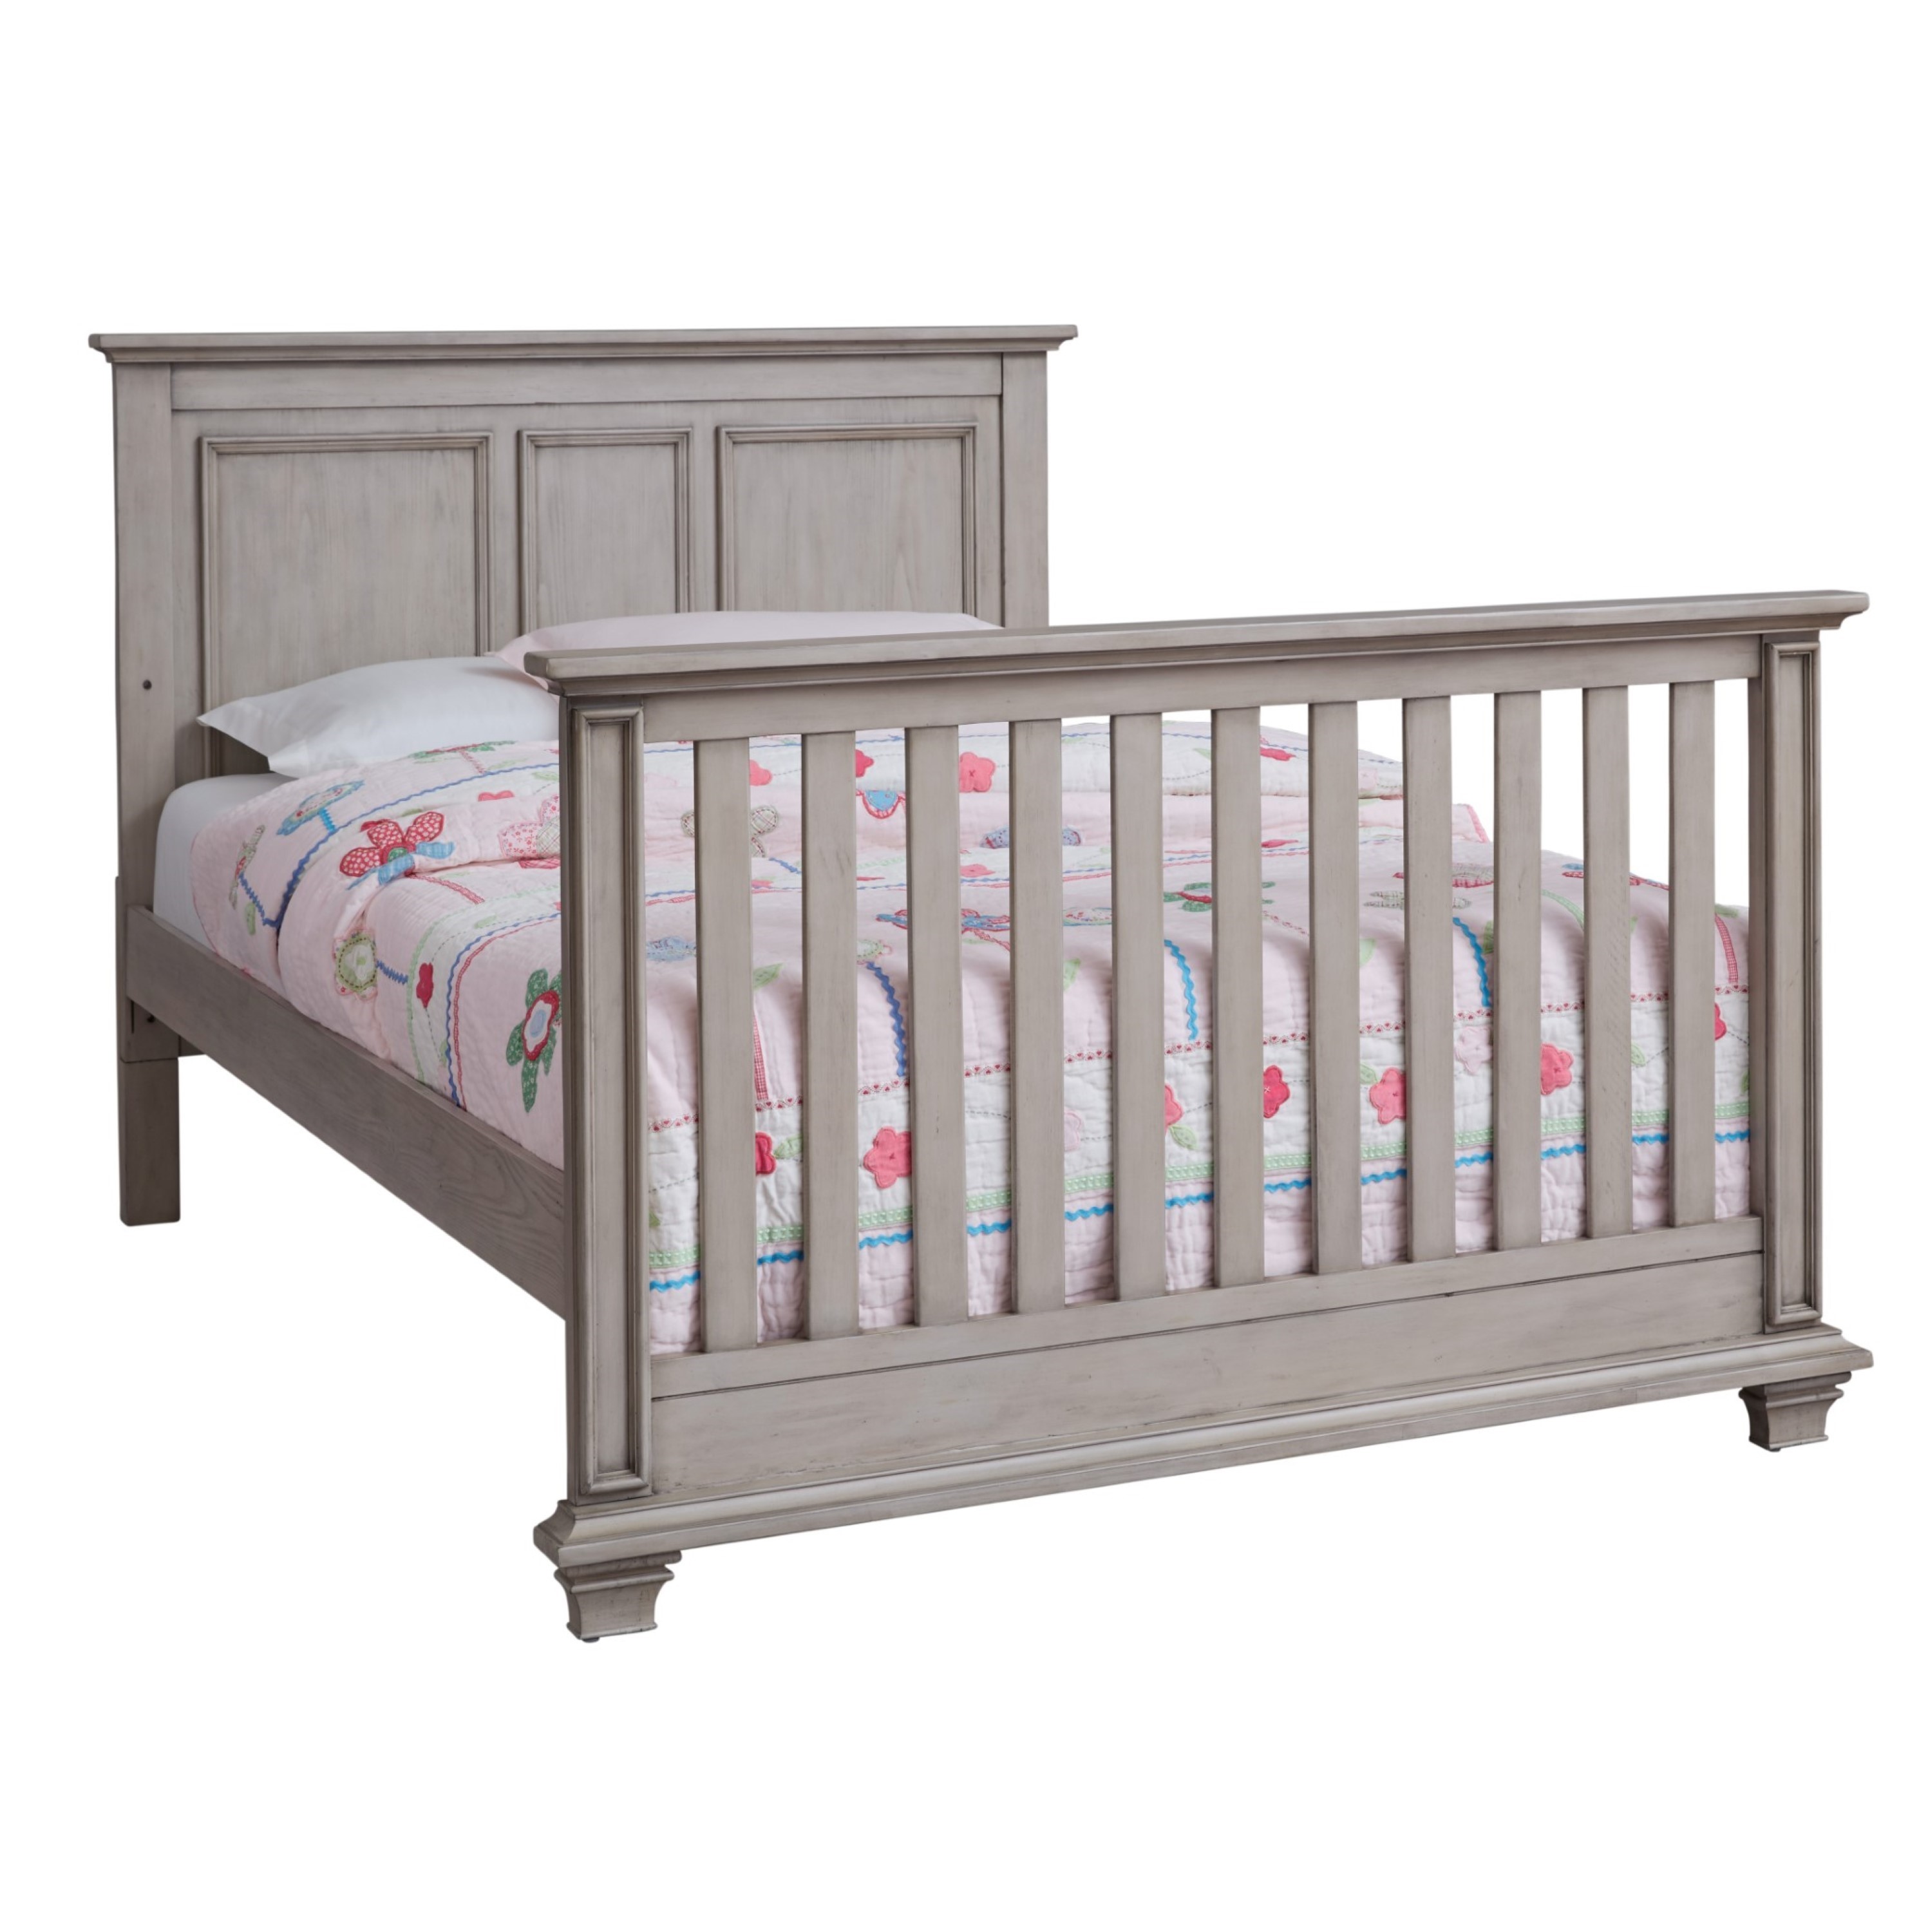 Oxford Baby Kenilworth 4-in-1 Convertible Crib, Stone Wash, GREENGUARD Gold Certified, Wooden Crib - image 5 of 10